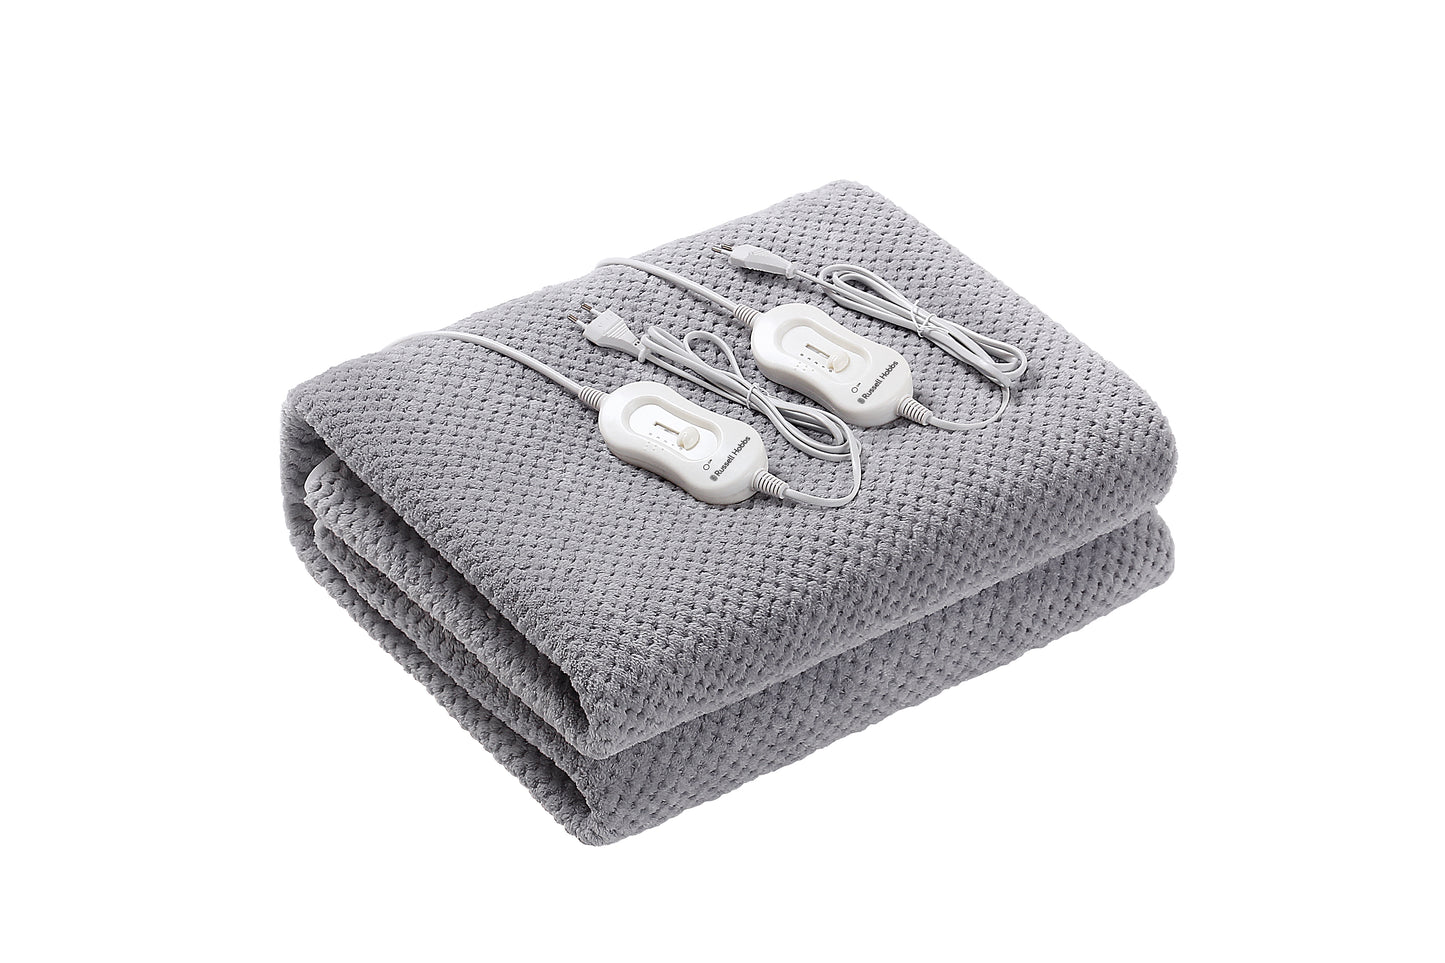 Russell Hobbs Double Electric Blanket with Coral Fleece